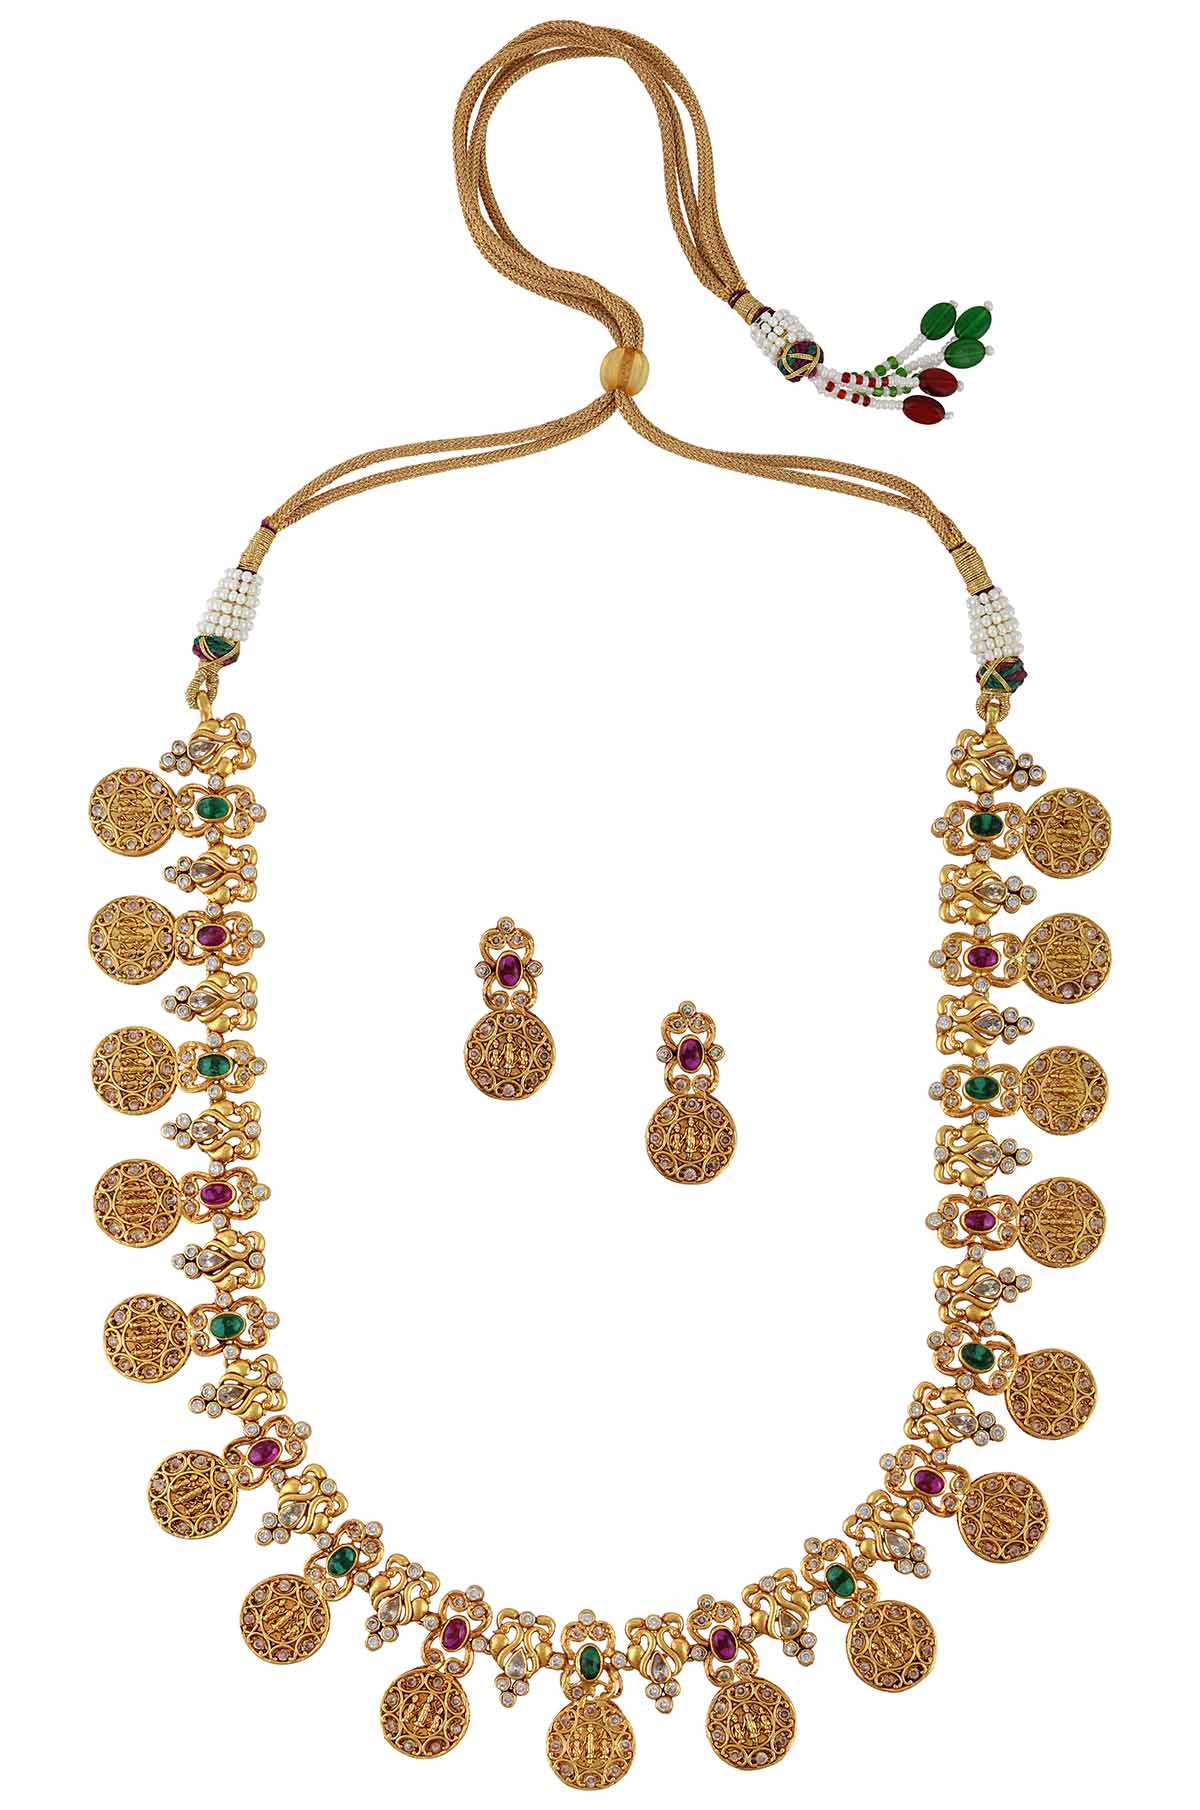 Gold Plated Silver Mayur Mala Necklace Earrings Set